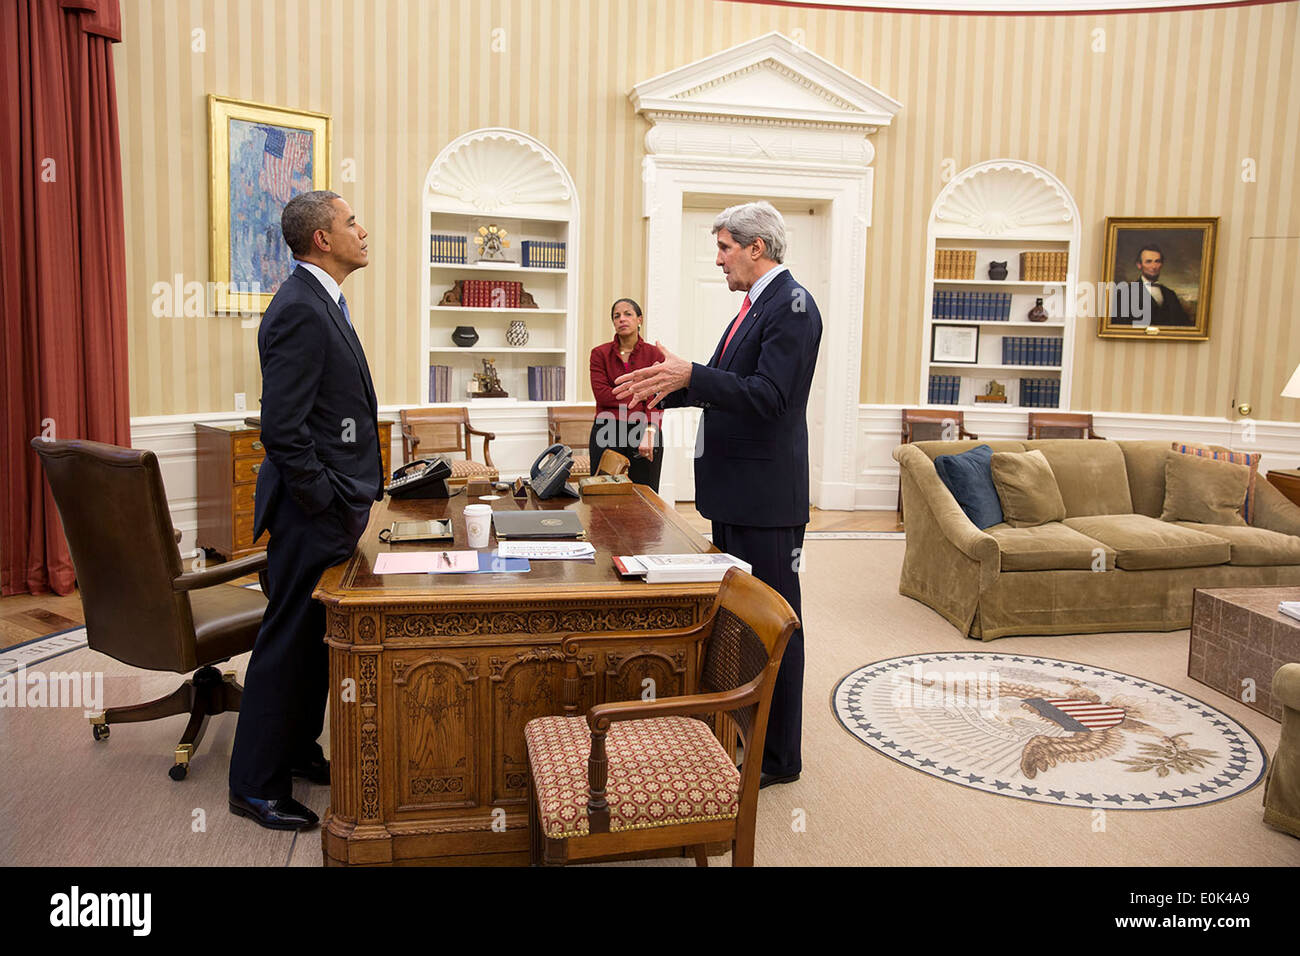 US President Barack Obama talks with Secretary of State John Kerry and National Security Advisor Susan E. Rice in the Oval Office of the White House March 19, 2014 in Washington, DC. Stock Photo